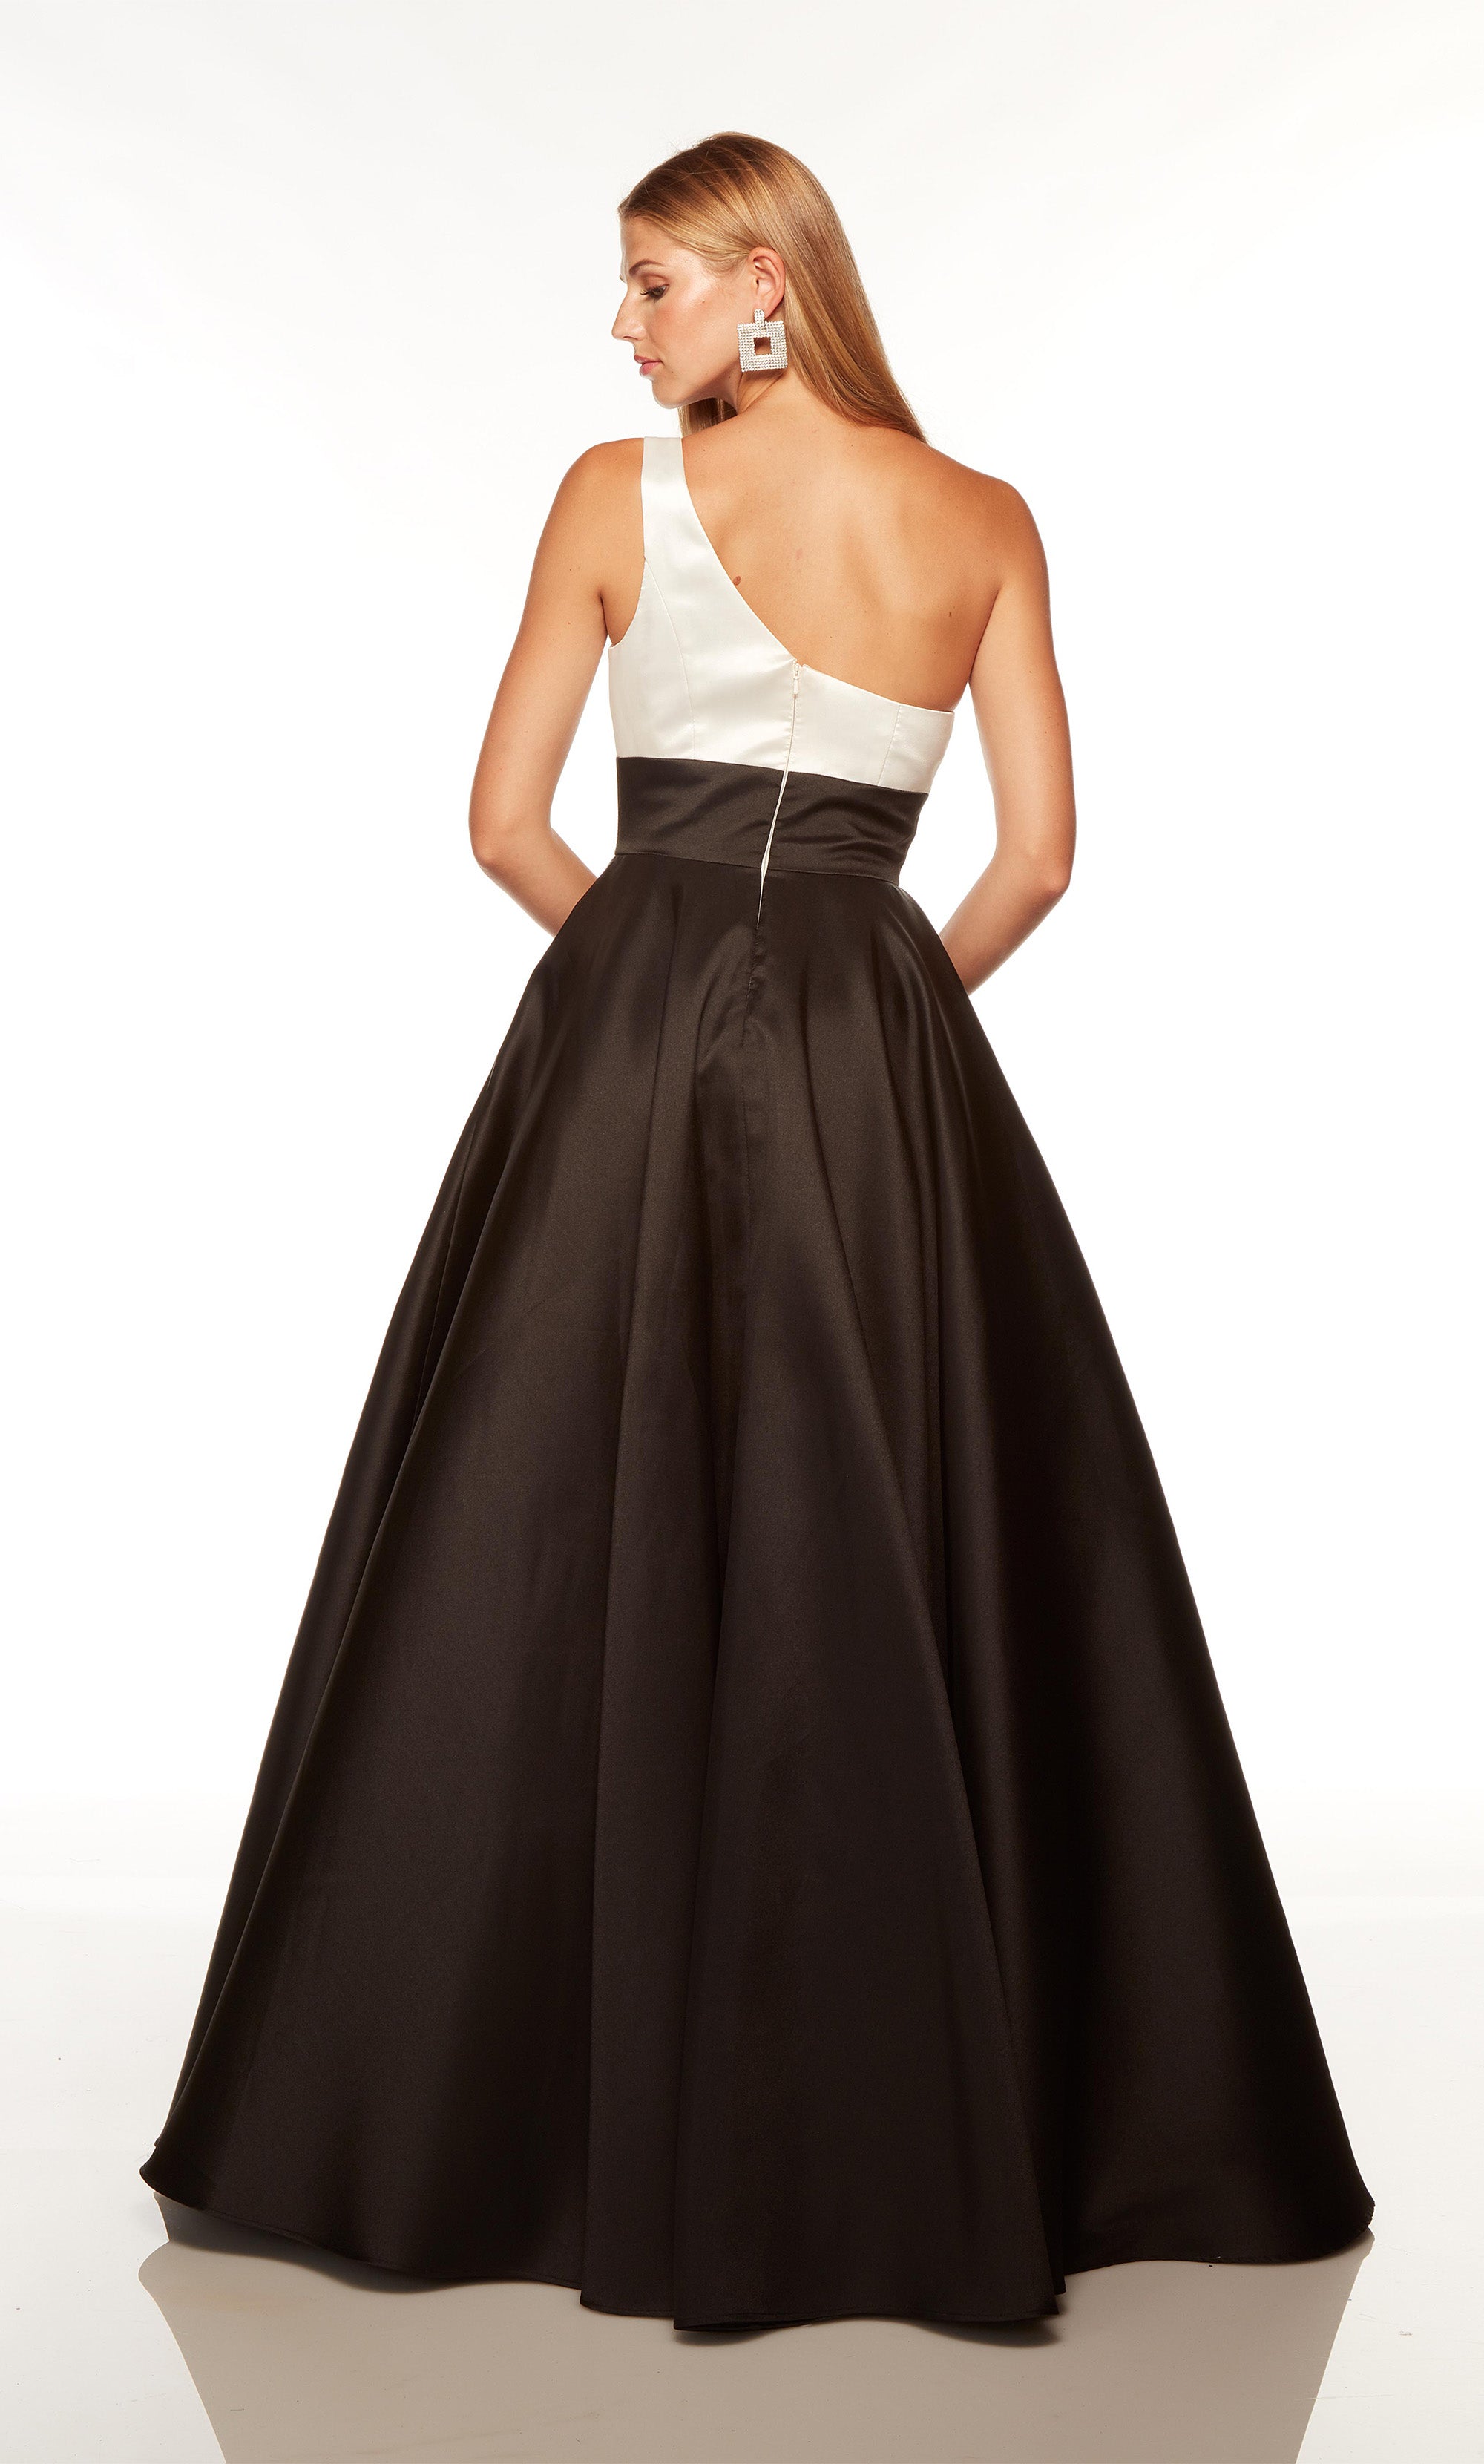 Black and white one shoulder prom dress with pockets. COLOR-SWATCH_1765__BLACK_DIAMOND-WHITE